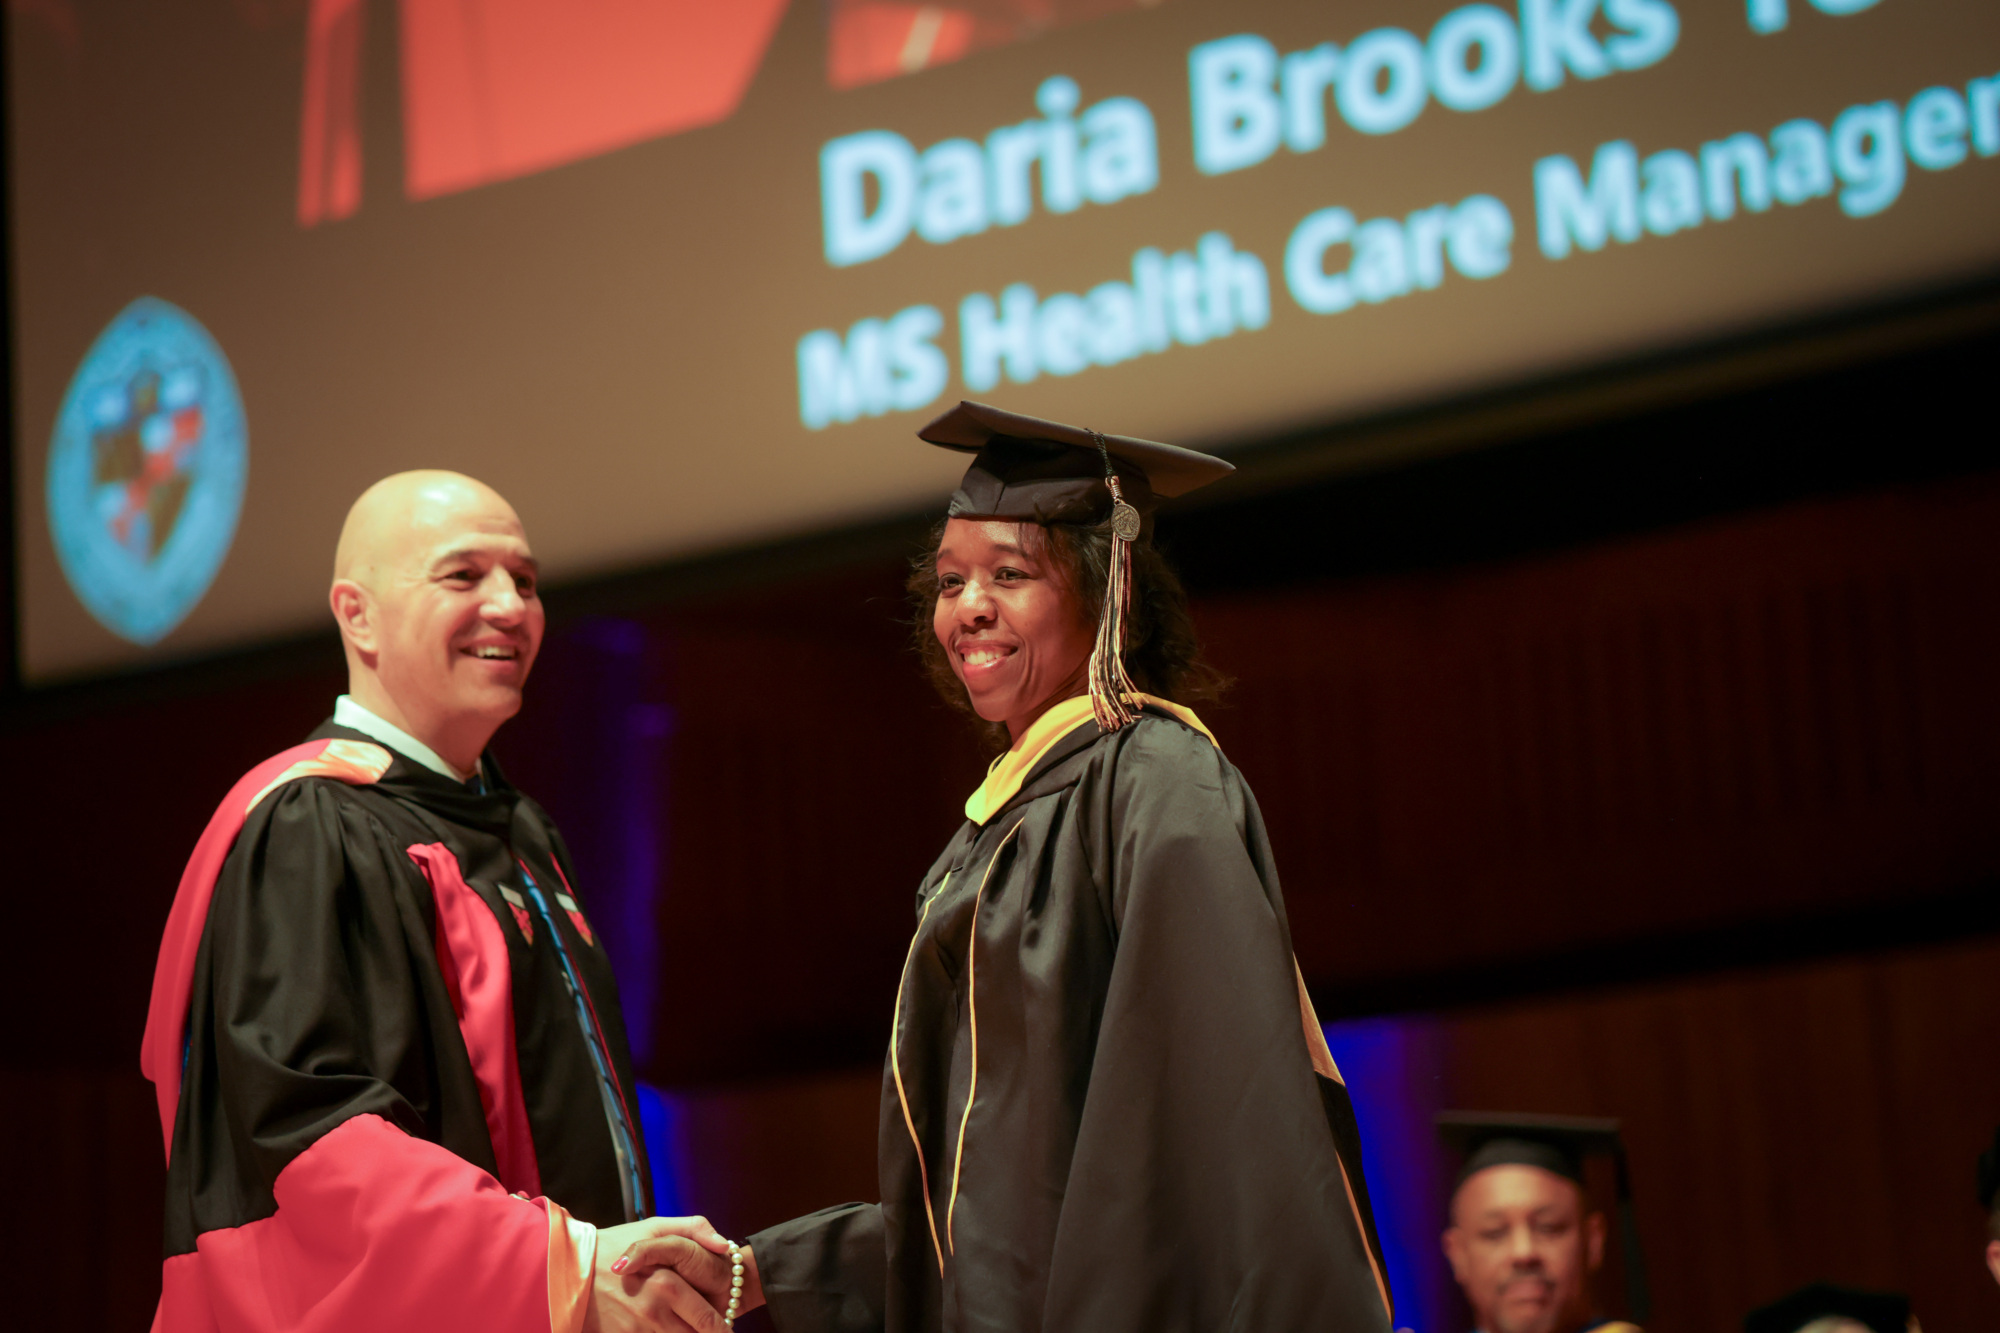 two people shaking hands, smiling on graduation stage